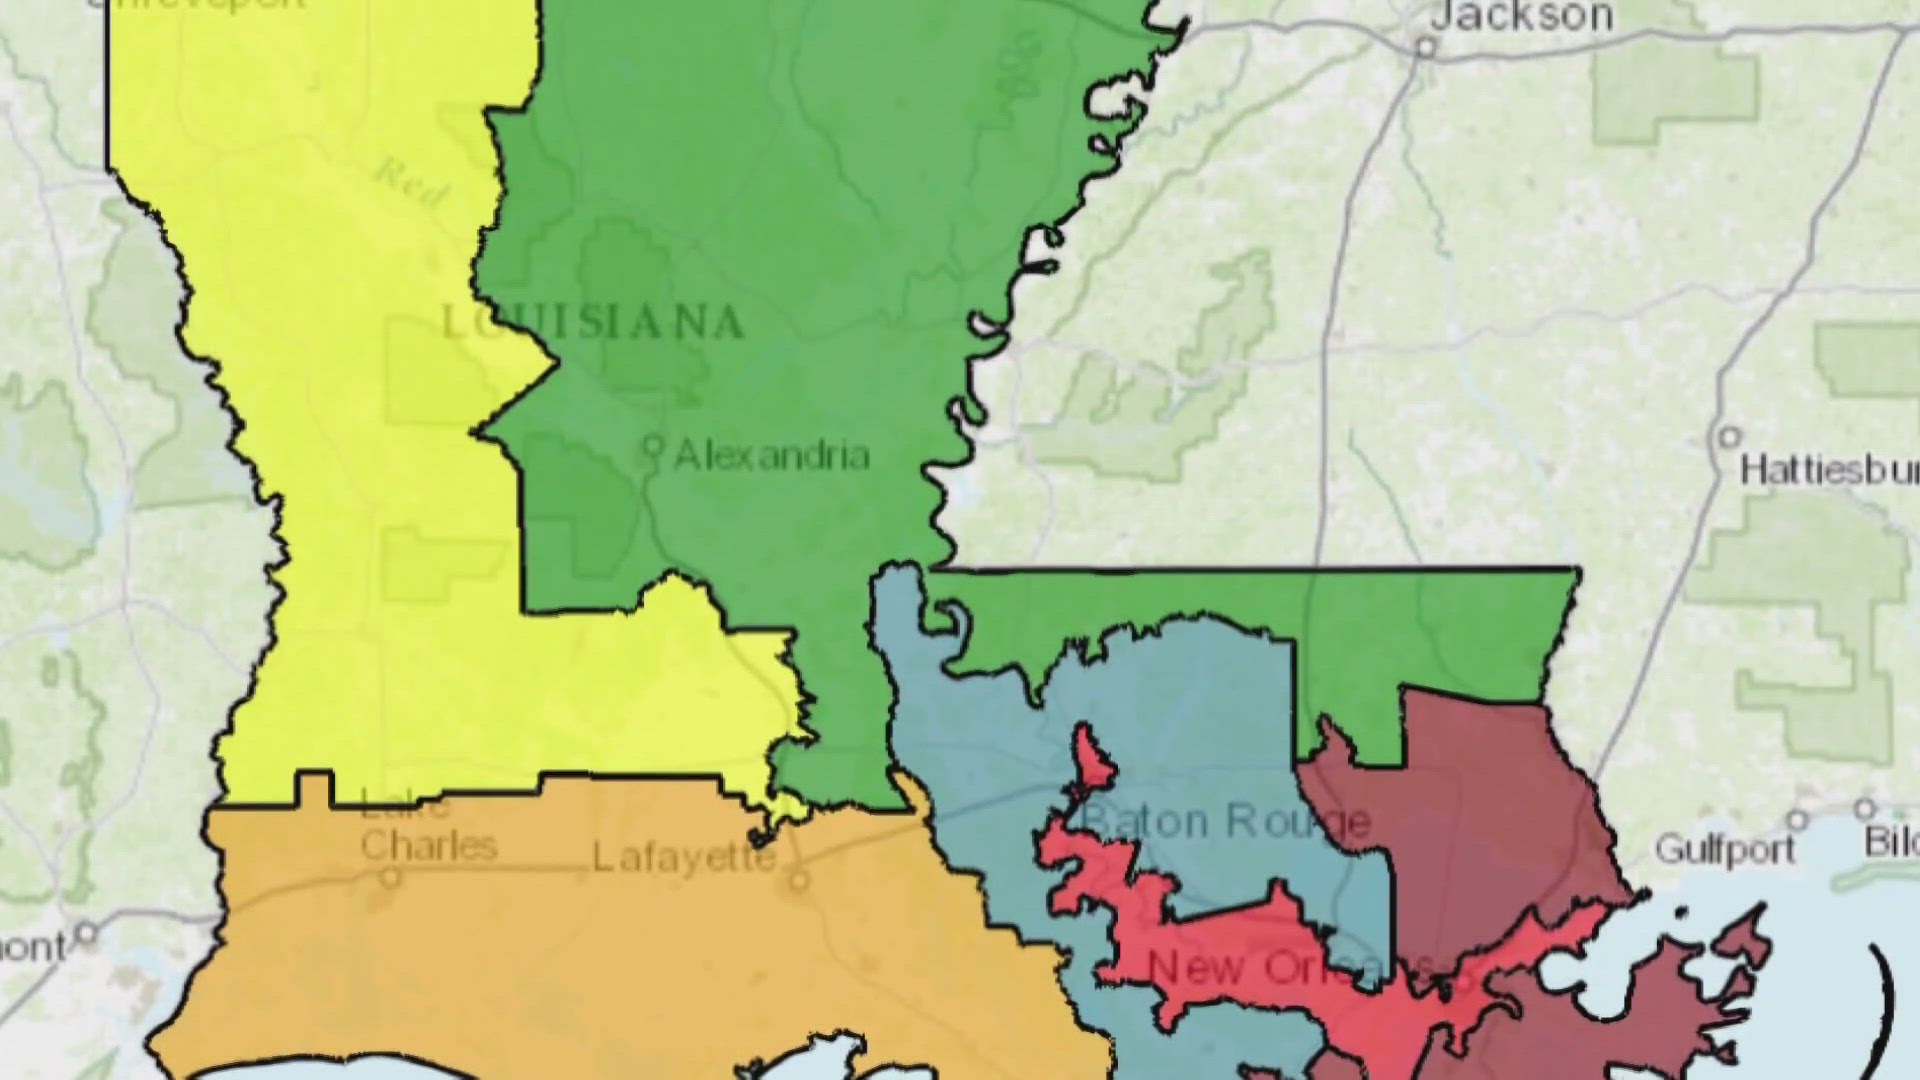 The Associated Press reports a panel of three federal judges has rejected Louisiana's congressional maps with a new majority-black district.